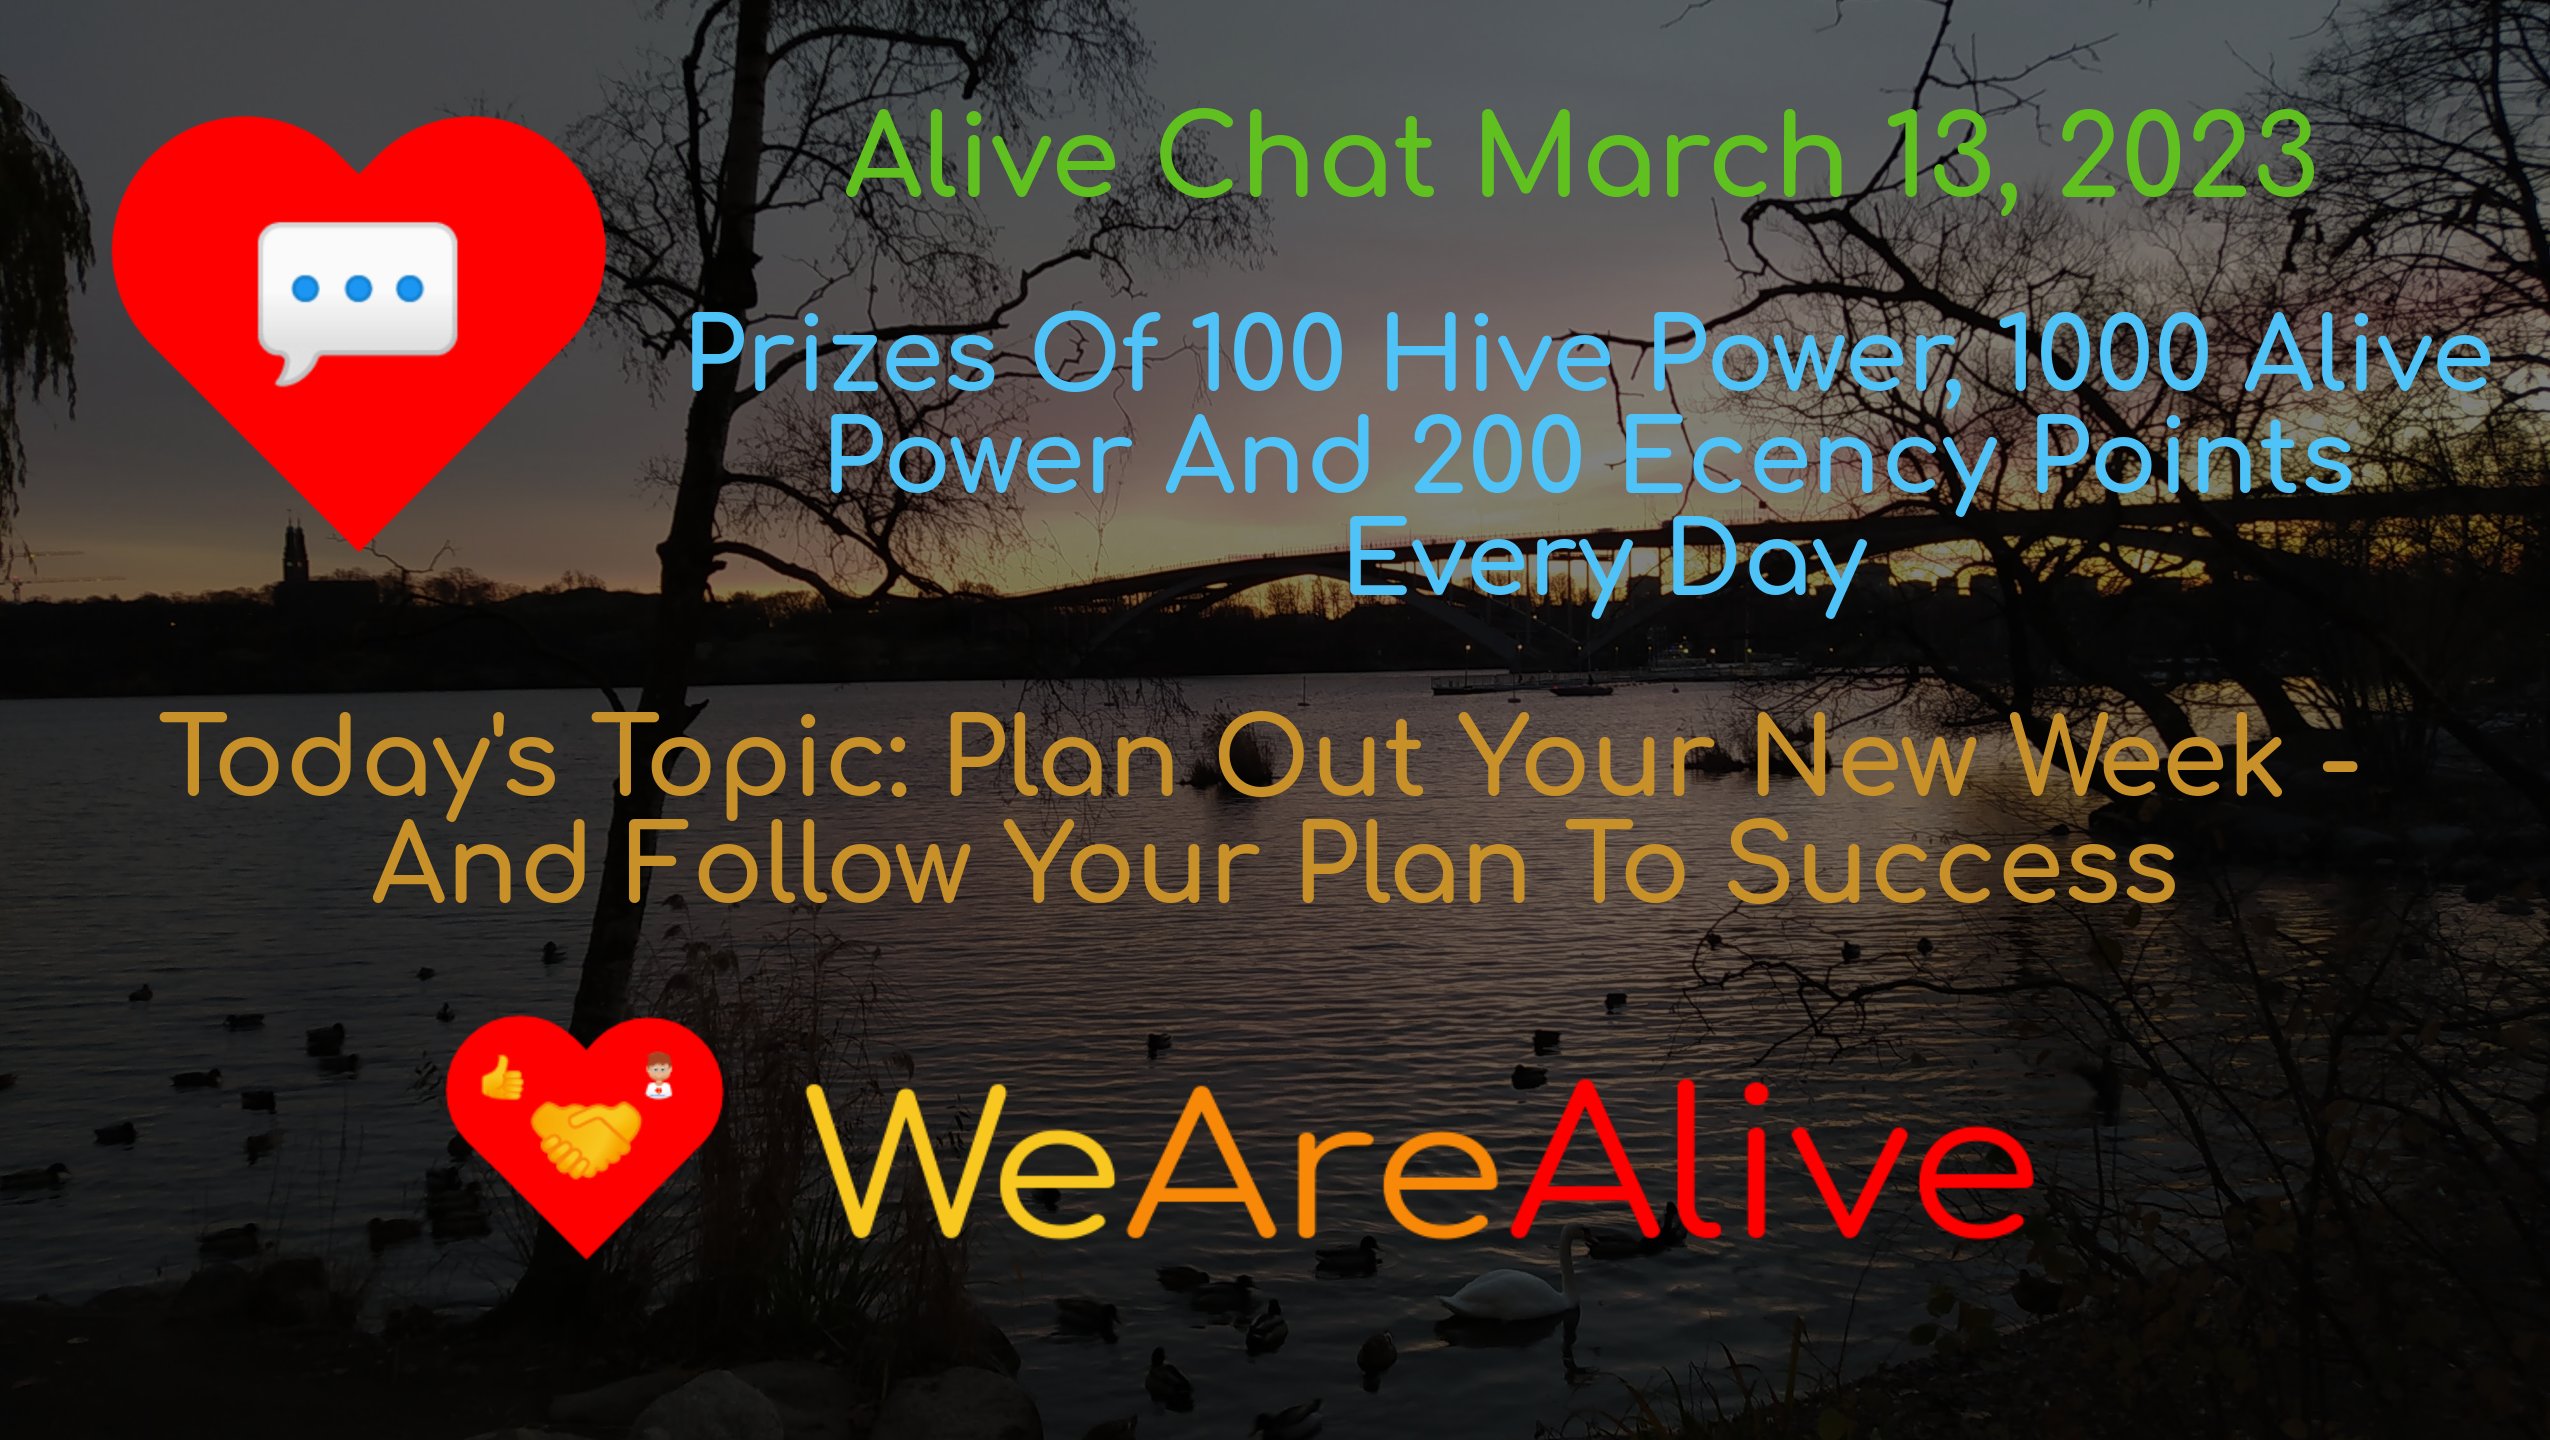 @alive.chat/alive-chat-march-13-2023